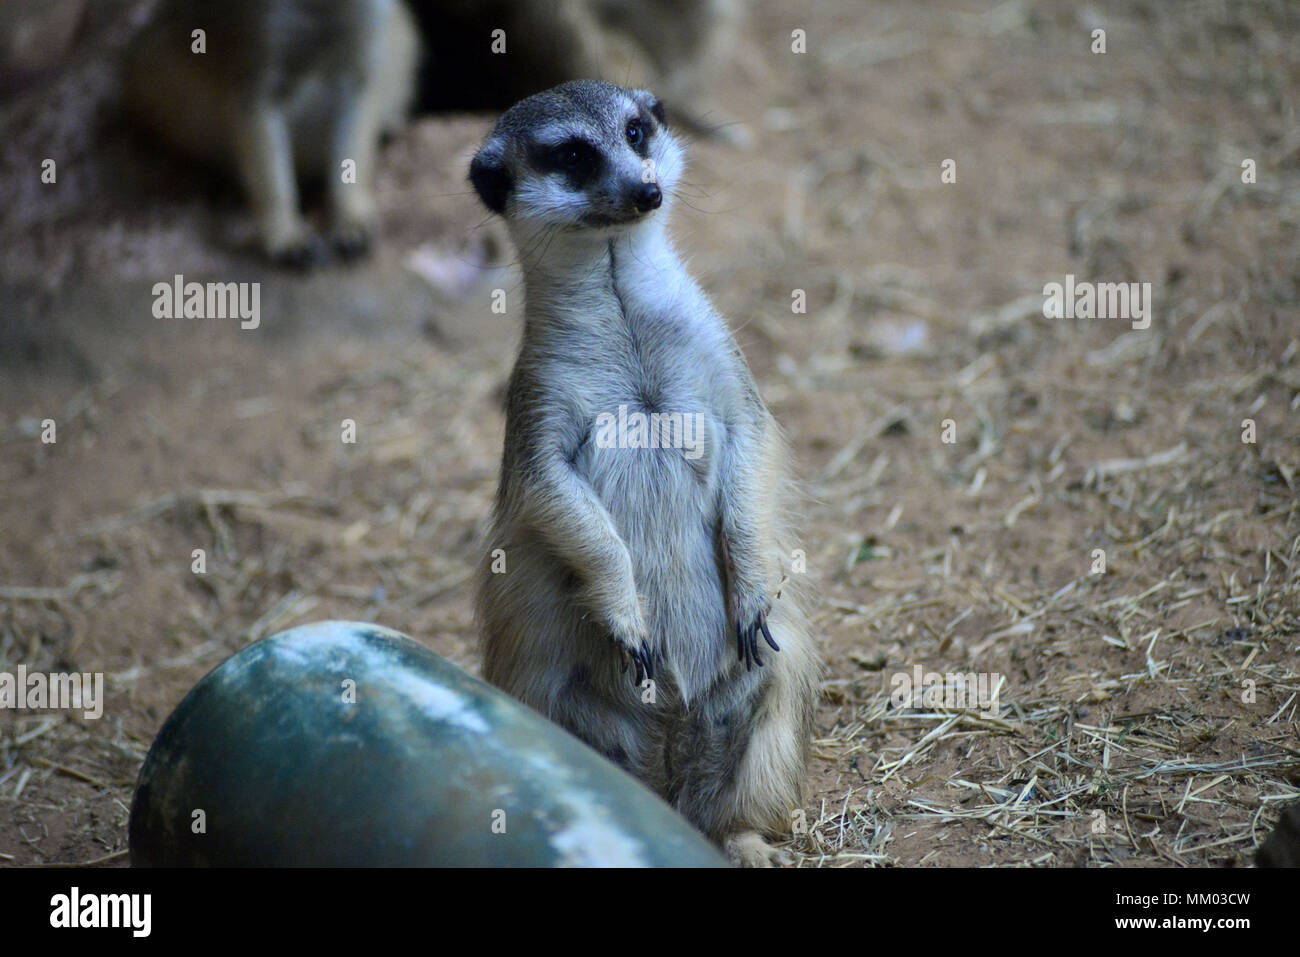 May 9, 2018 - SÃ£O Paulo, SÃ£o Paulo, Brazil - SAO PAULO SP, SP 09/05/2018 SURICIES IN THE AQUARIUM OF SP: Suricates are seen in the Aquarium of SÃ£o Paulo in the South Zone on Wednesday, 9th. The suricates are exclusively diurnal and live in colonies of up to 40 individuals, who construct a complicated system of tunnels underground, where they remain overnight. They have a longevity between 5 and 12 years, reaching up to 15 in captivity. Within the group, the animals take turns in the tasks of guarding and protecting the children of the community. The social system of the suricates is complex Stock Photo